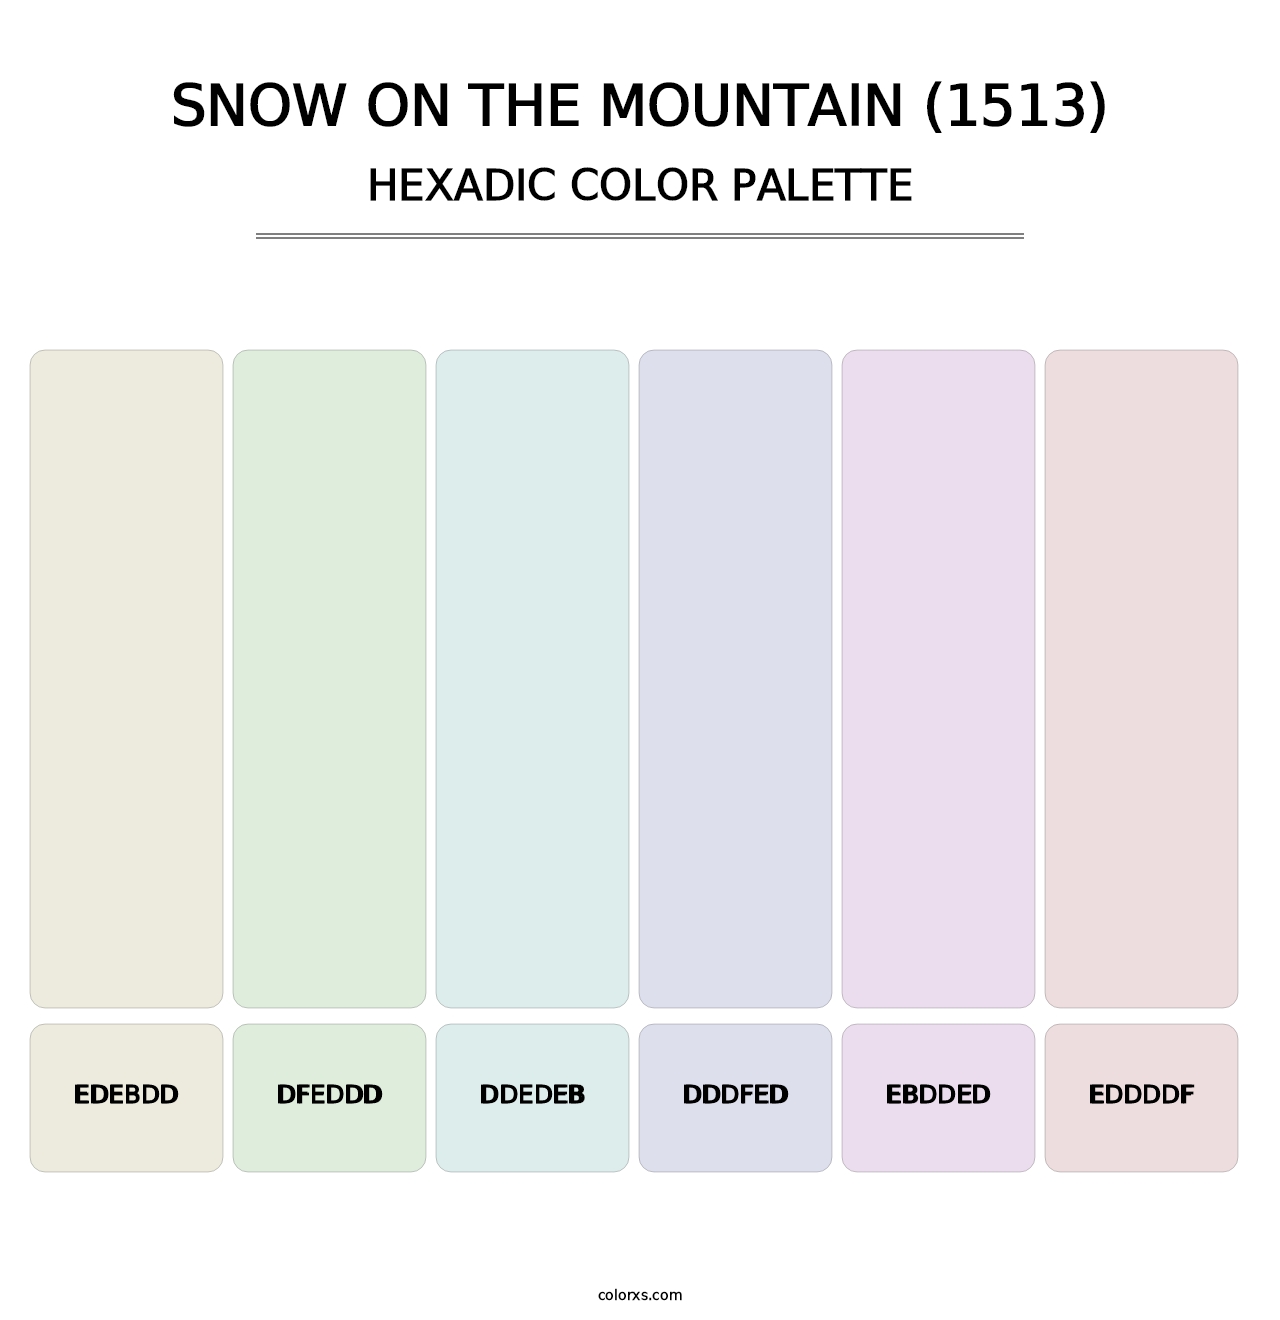 Snow on the Mountain (1513) - Hexadic Color Palette